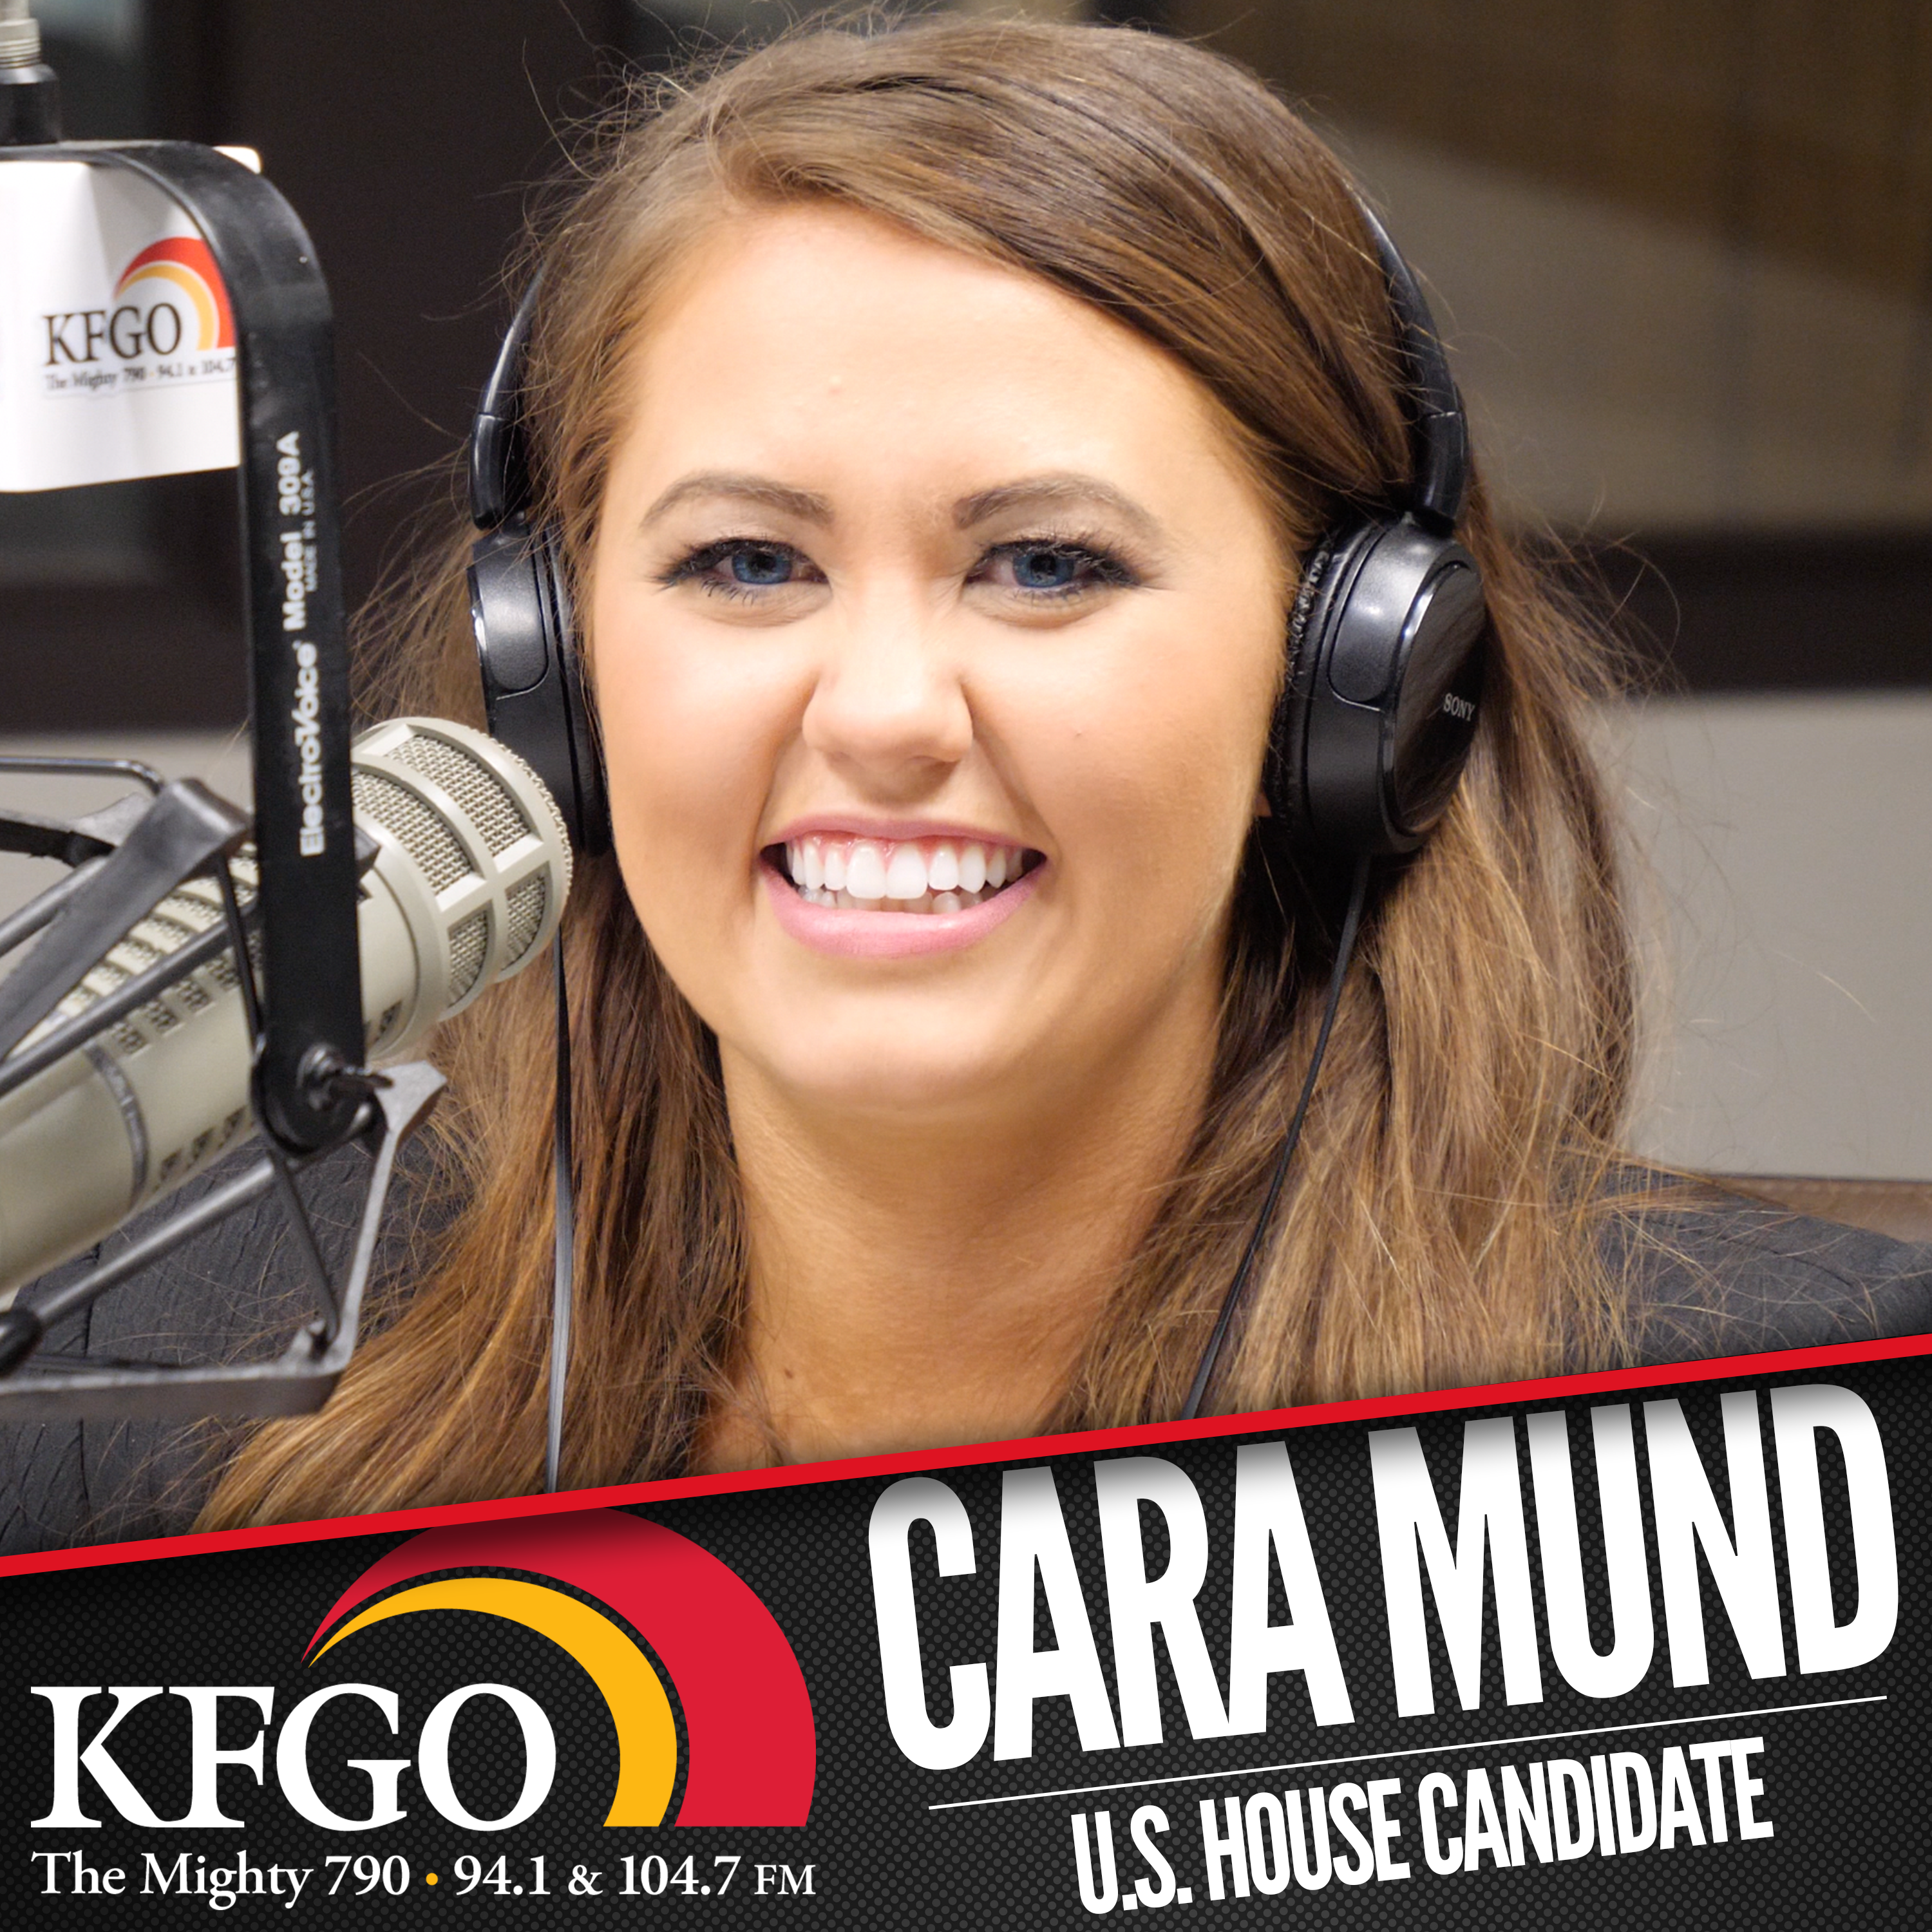 What makes Cara Mund different from her Republican opponents?